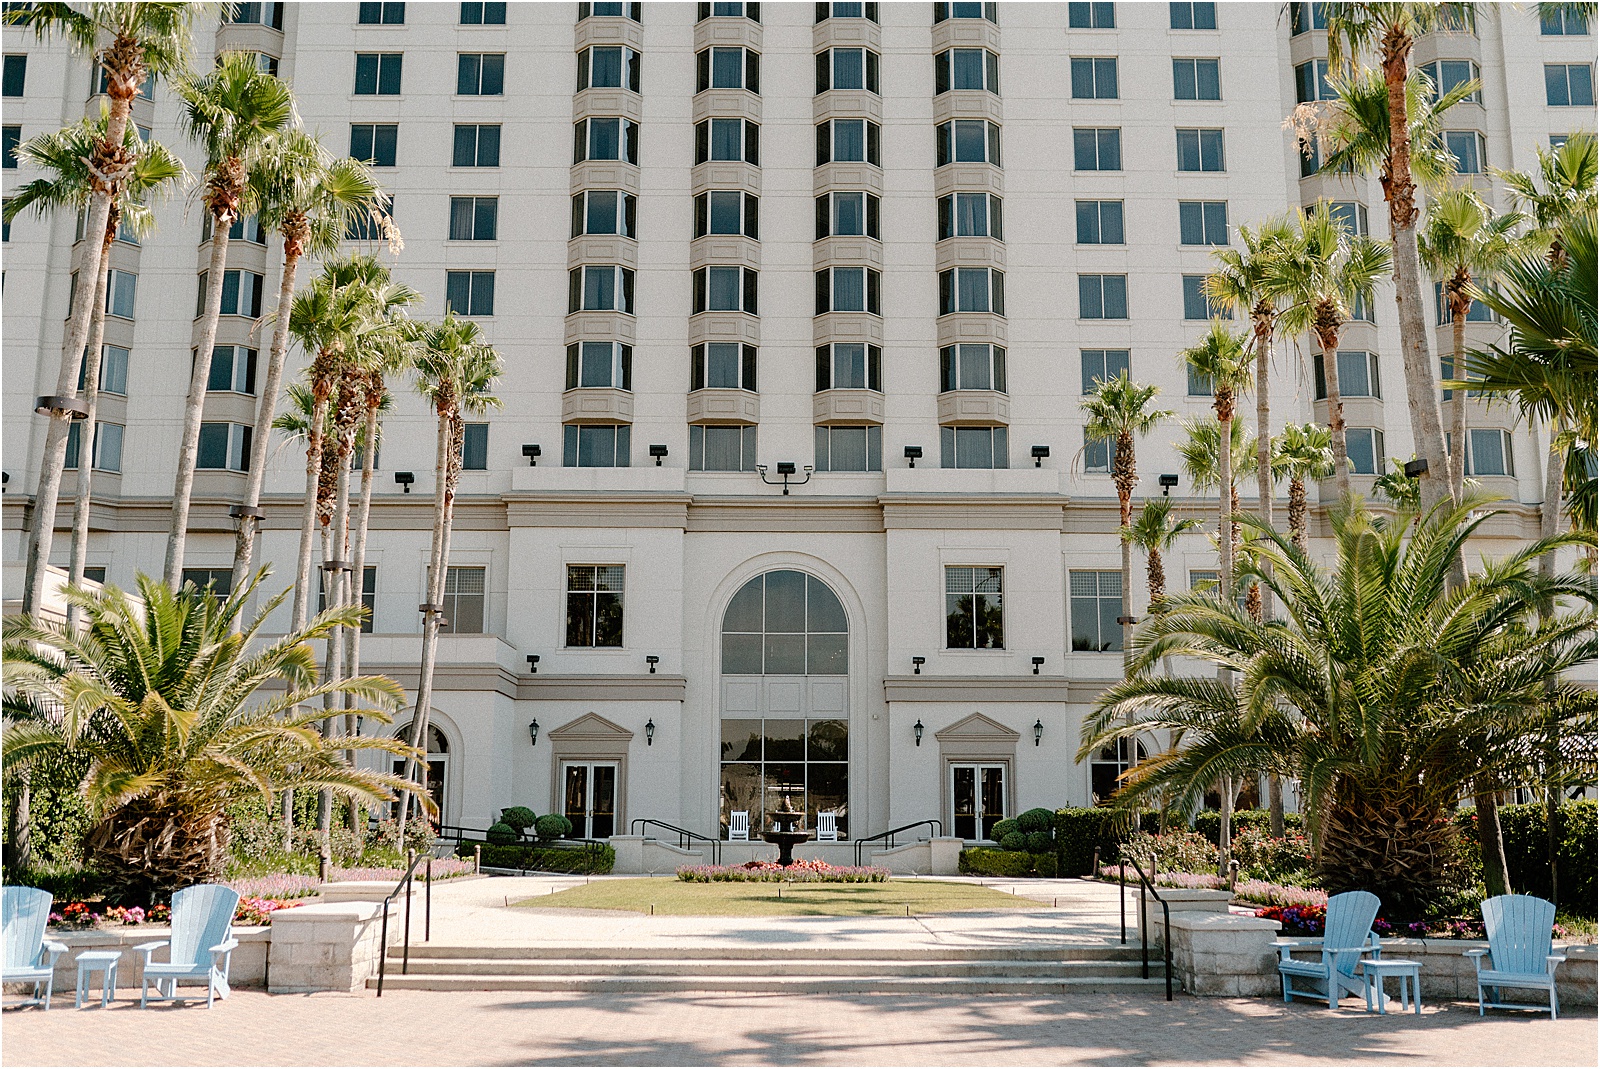 The Westin Savannah River lawn with palm trees and florals in the garden